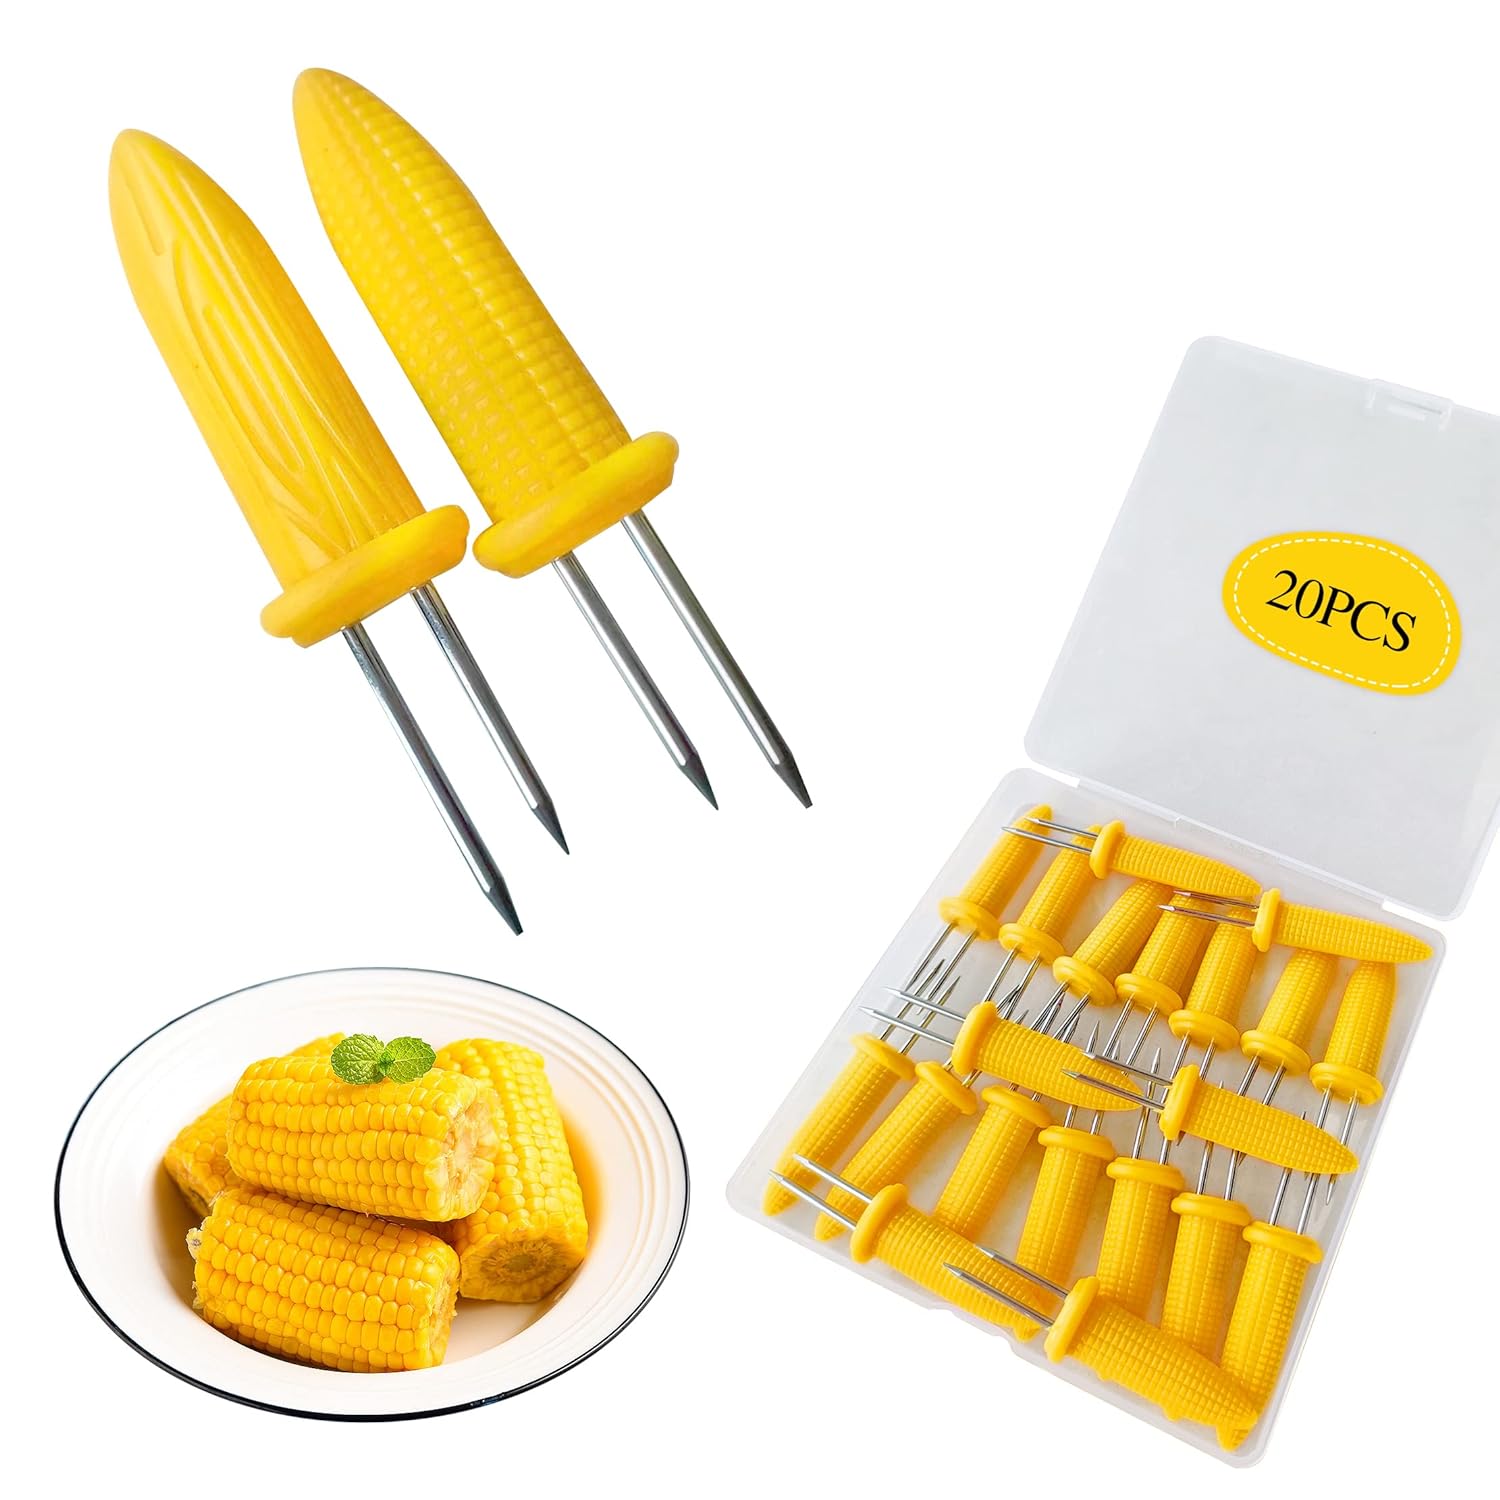 Great Choice Products 20 Pcs/Set Corn On The Cob Holders, Stainless Steel Heat Resistant Non Slip Barbecue Corn Prongs Skewers For Bbq, Cooking,…